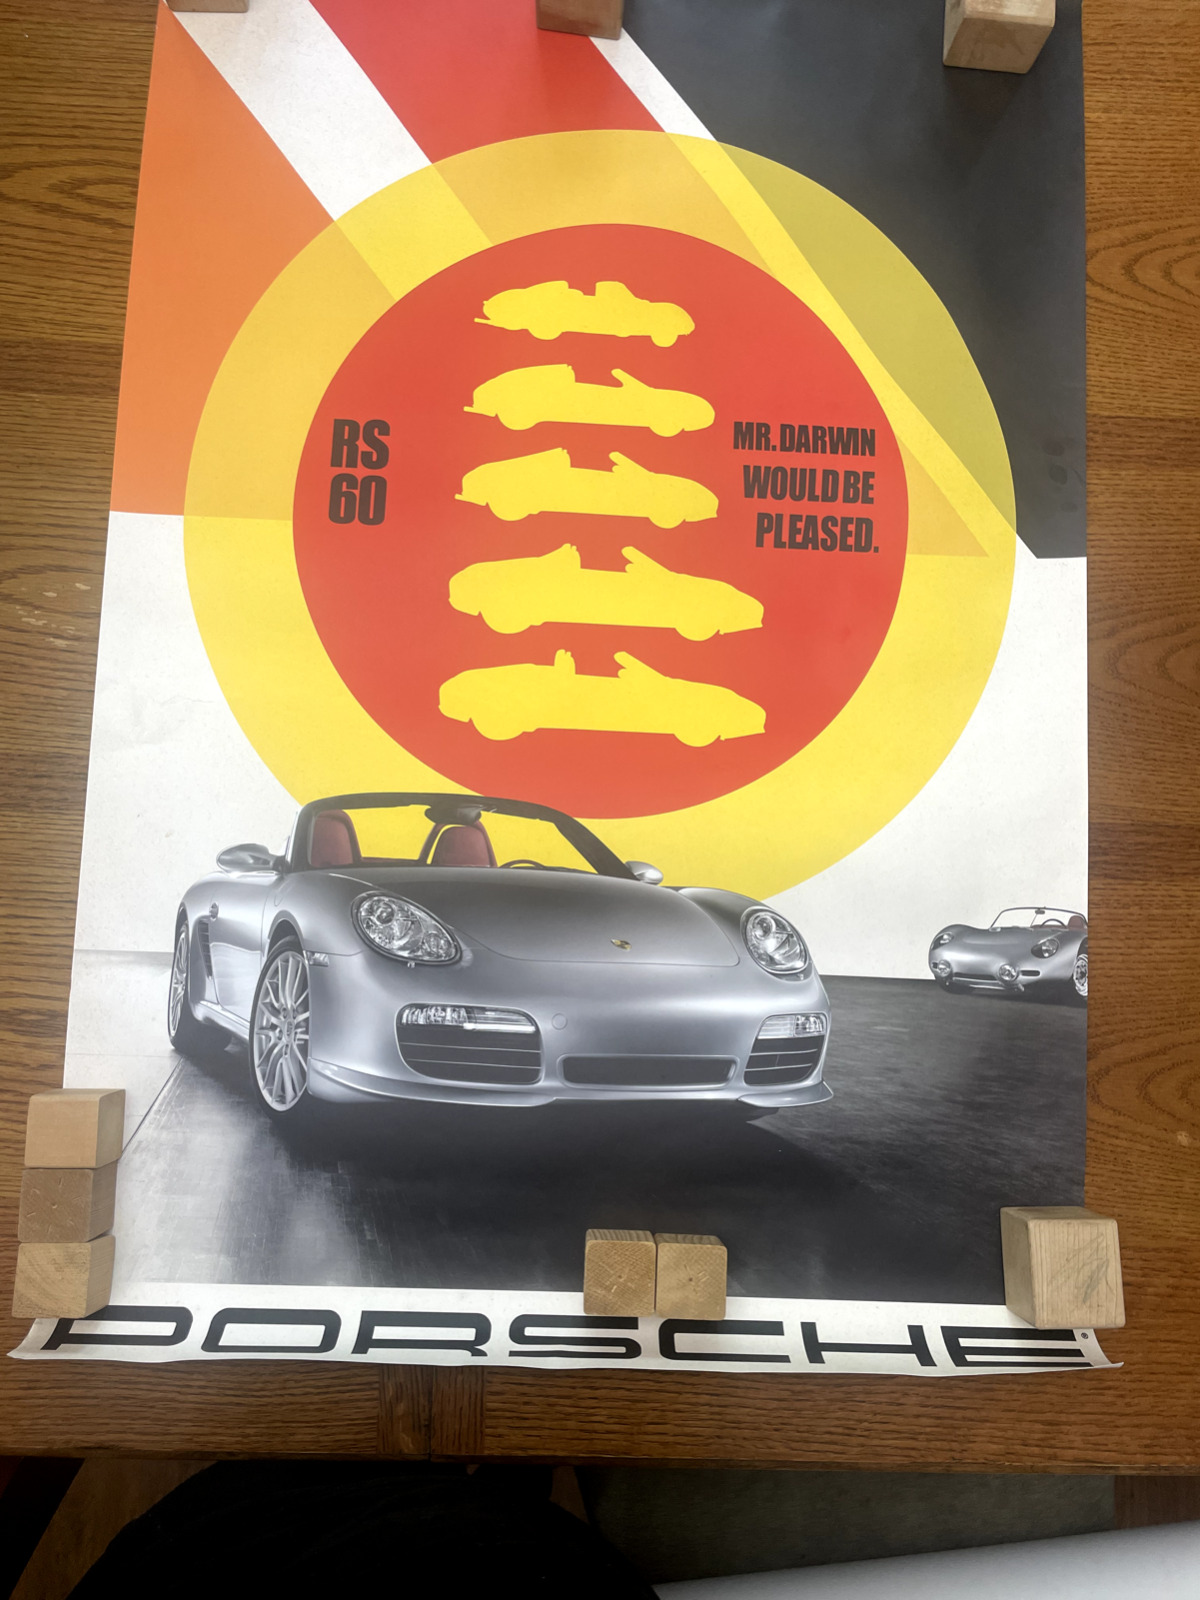 FULL SET OF 3 RARE PROMO PORSCHE BOXSTER RS 60 ROADSTER POSTERS